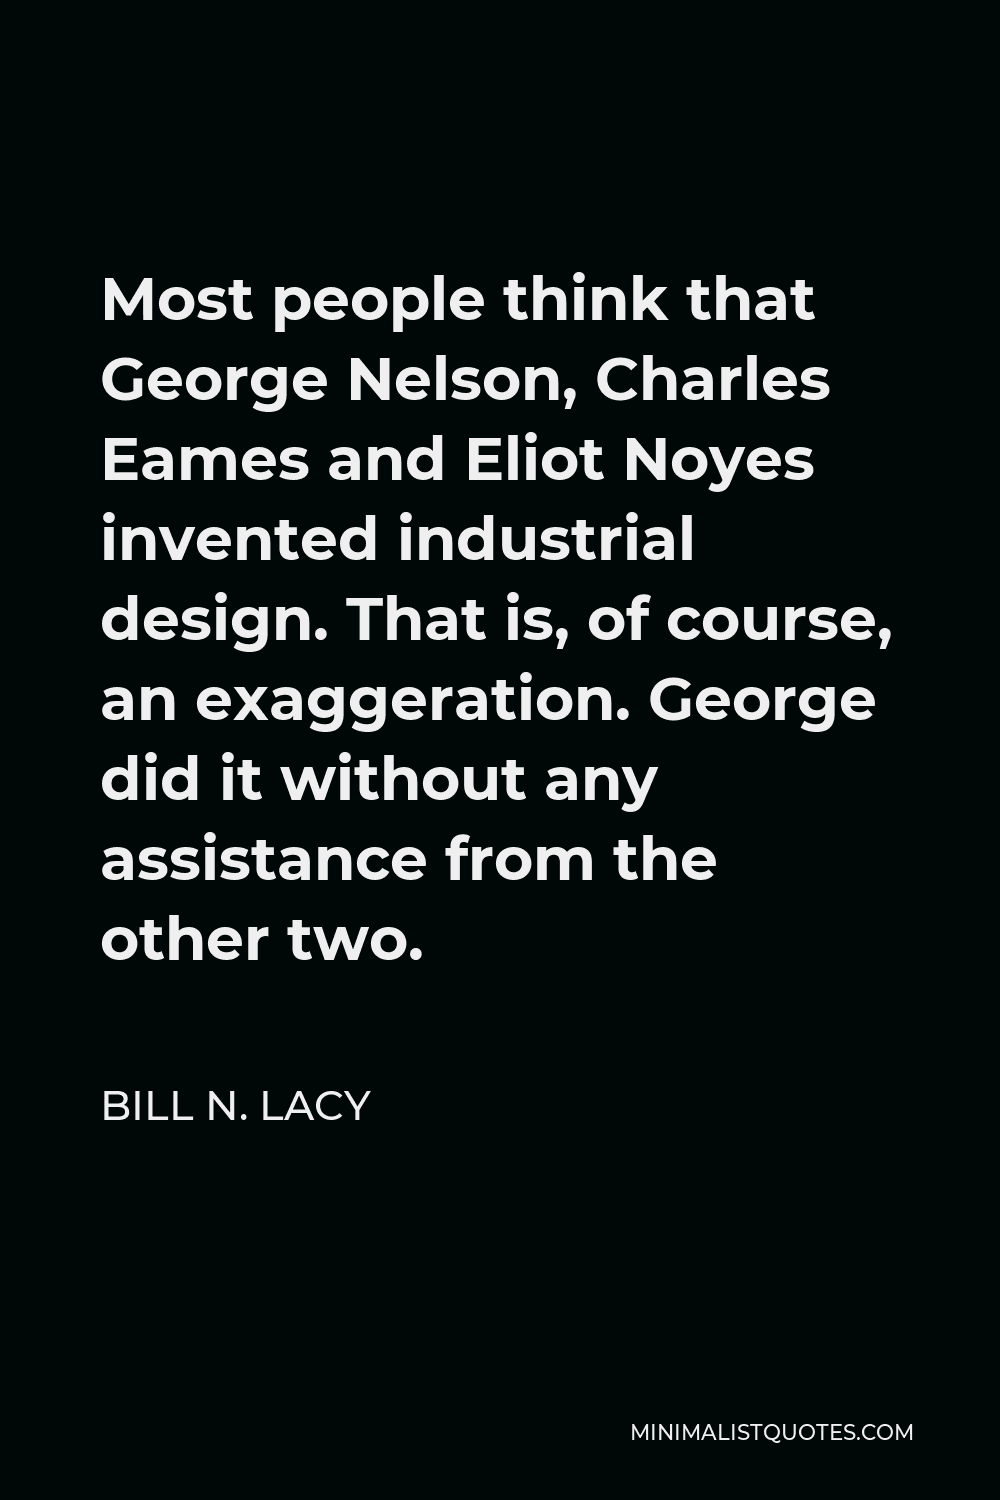 Bill N. Lacy Quote - Most people think that George Nelson, Charles Eames and Eliot Noyes invented industrial design. That is, of course, an exaggeration. George did it without any assistance from the other two.